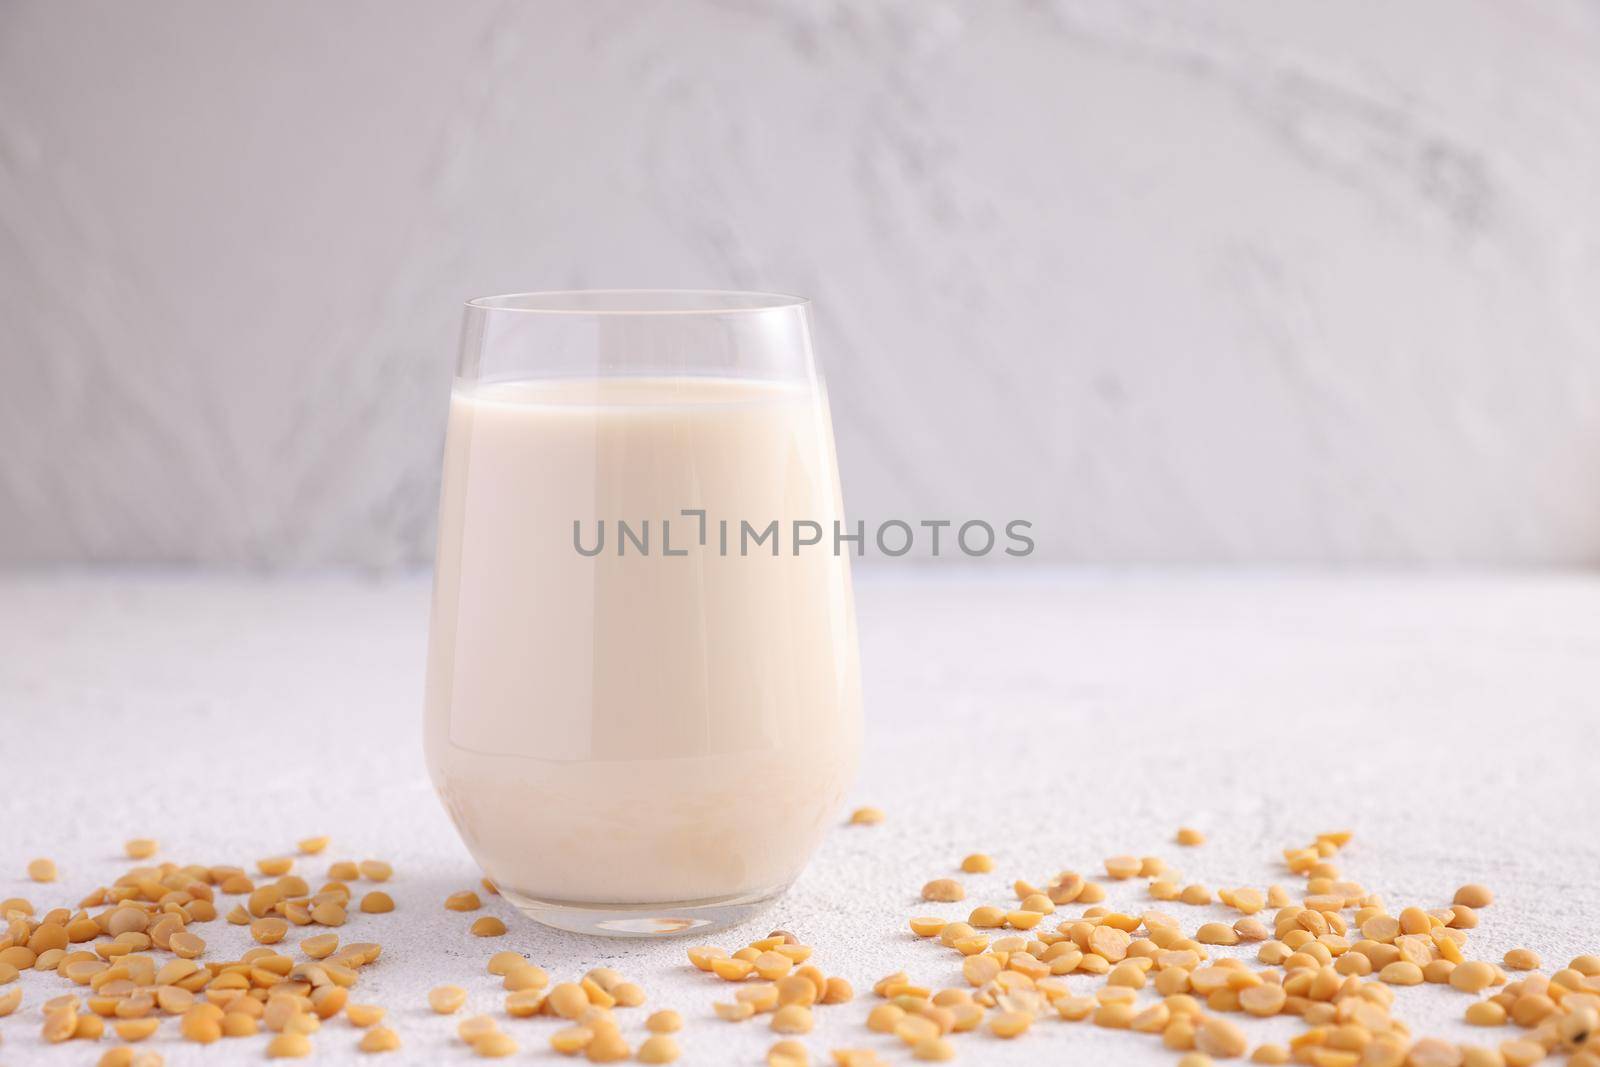 Soy milk in glass and soy bean isolated in white background by piyato